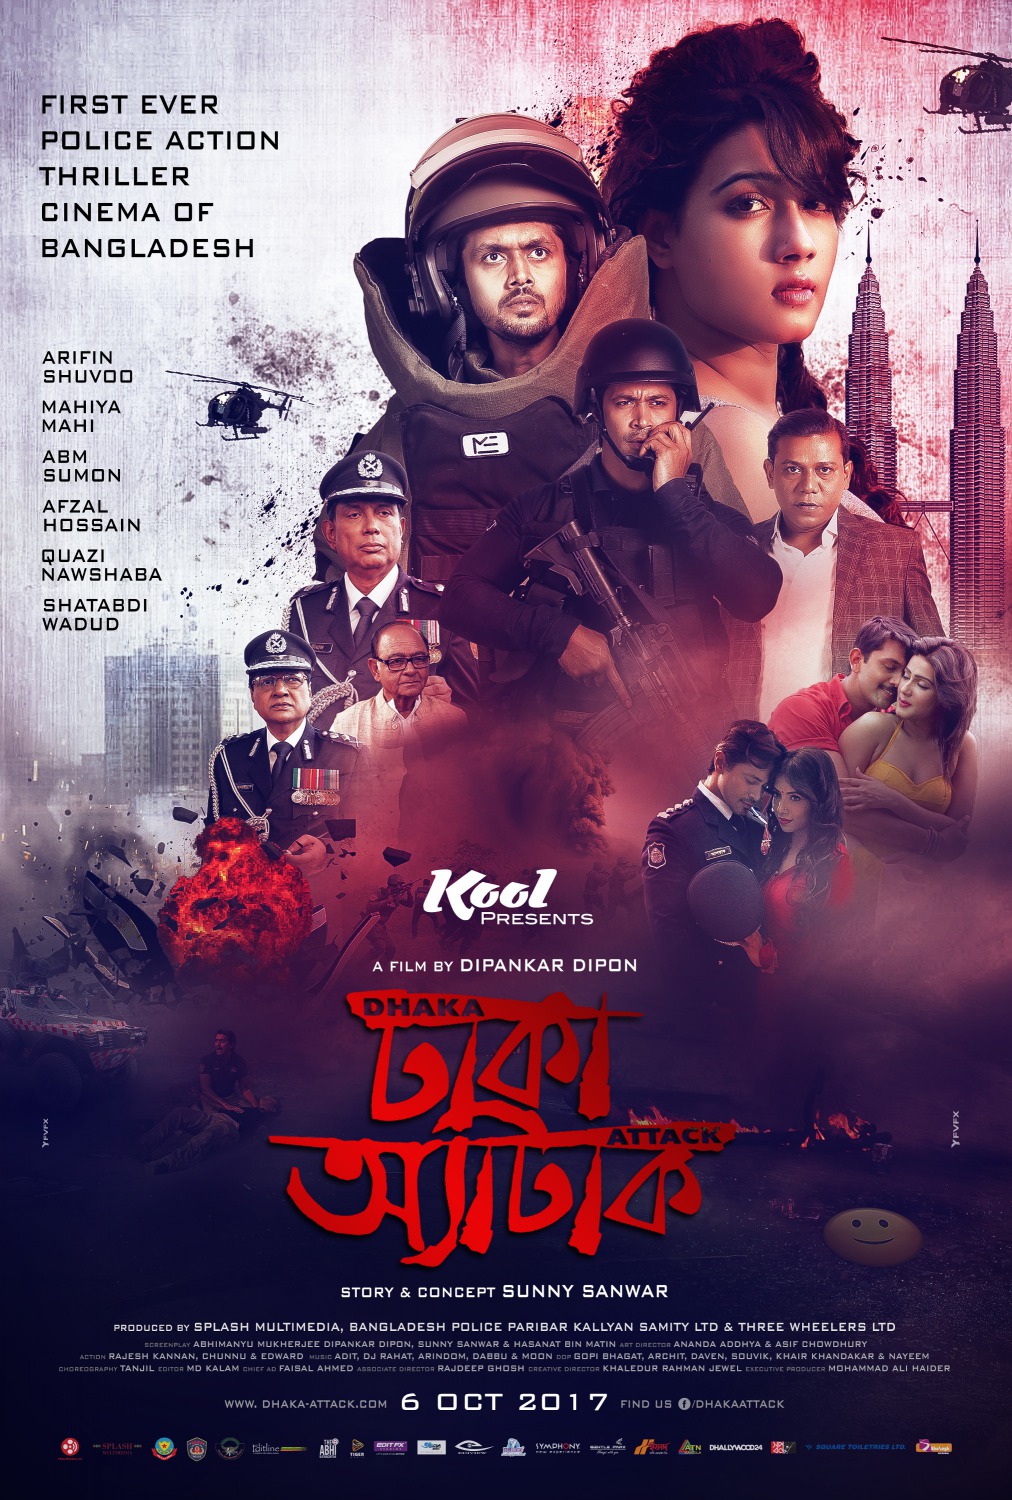 Extra Large Movie Poster Image for Dhaka Attack (#2 of 10)